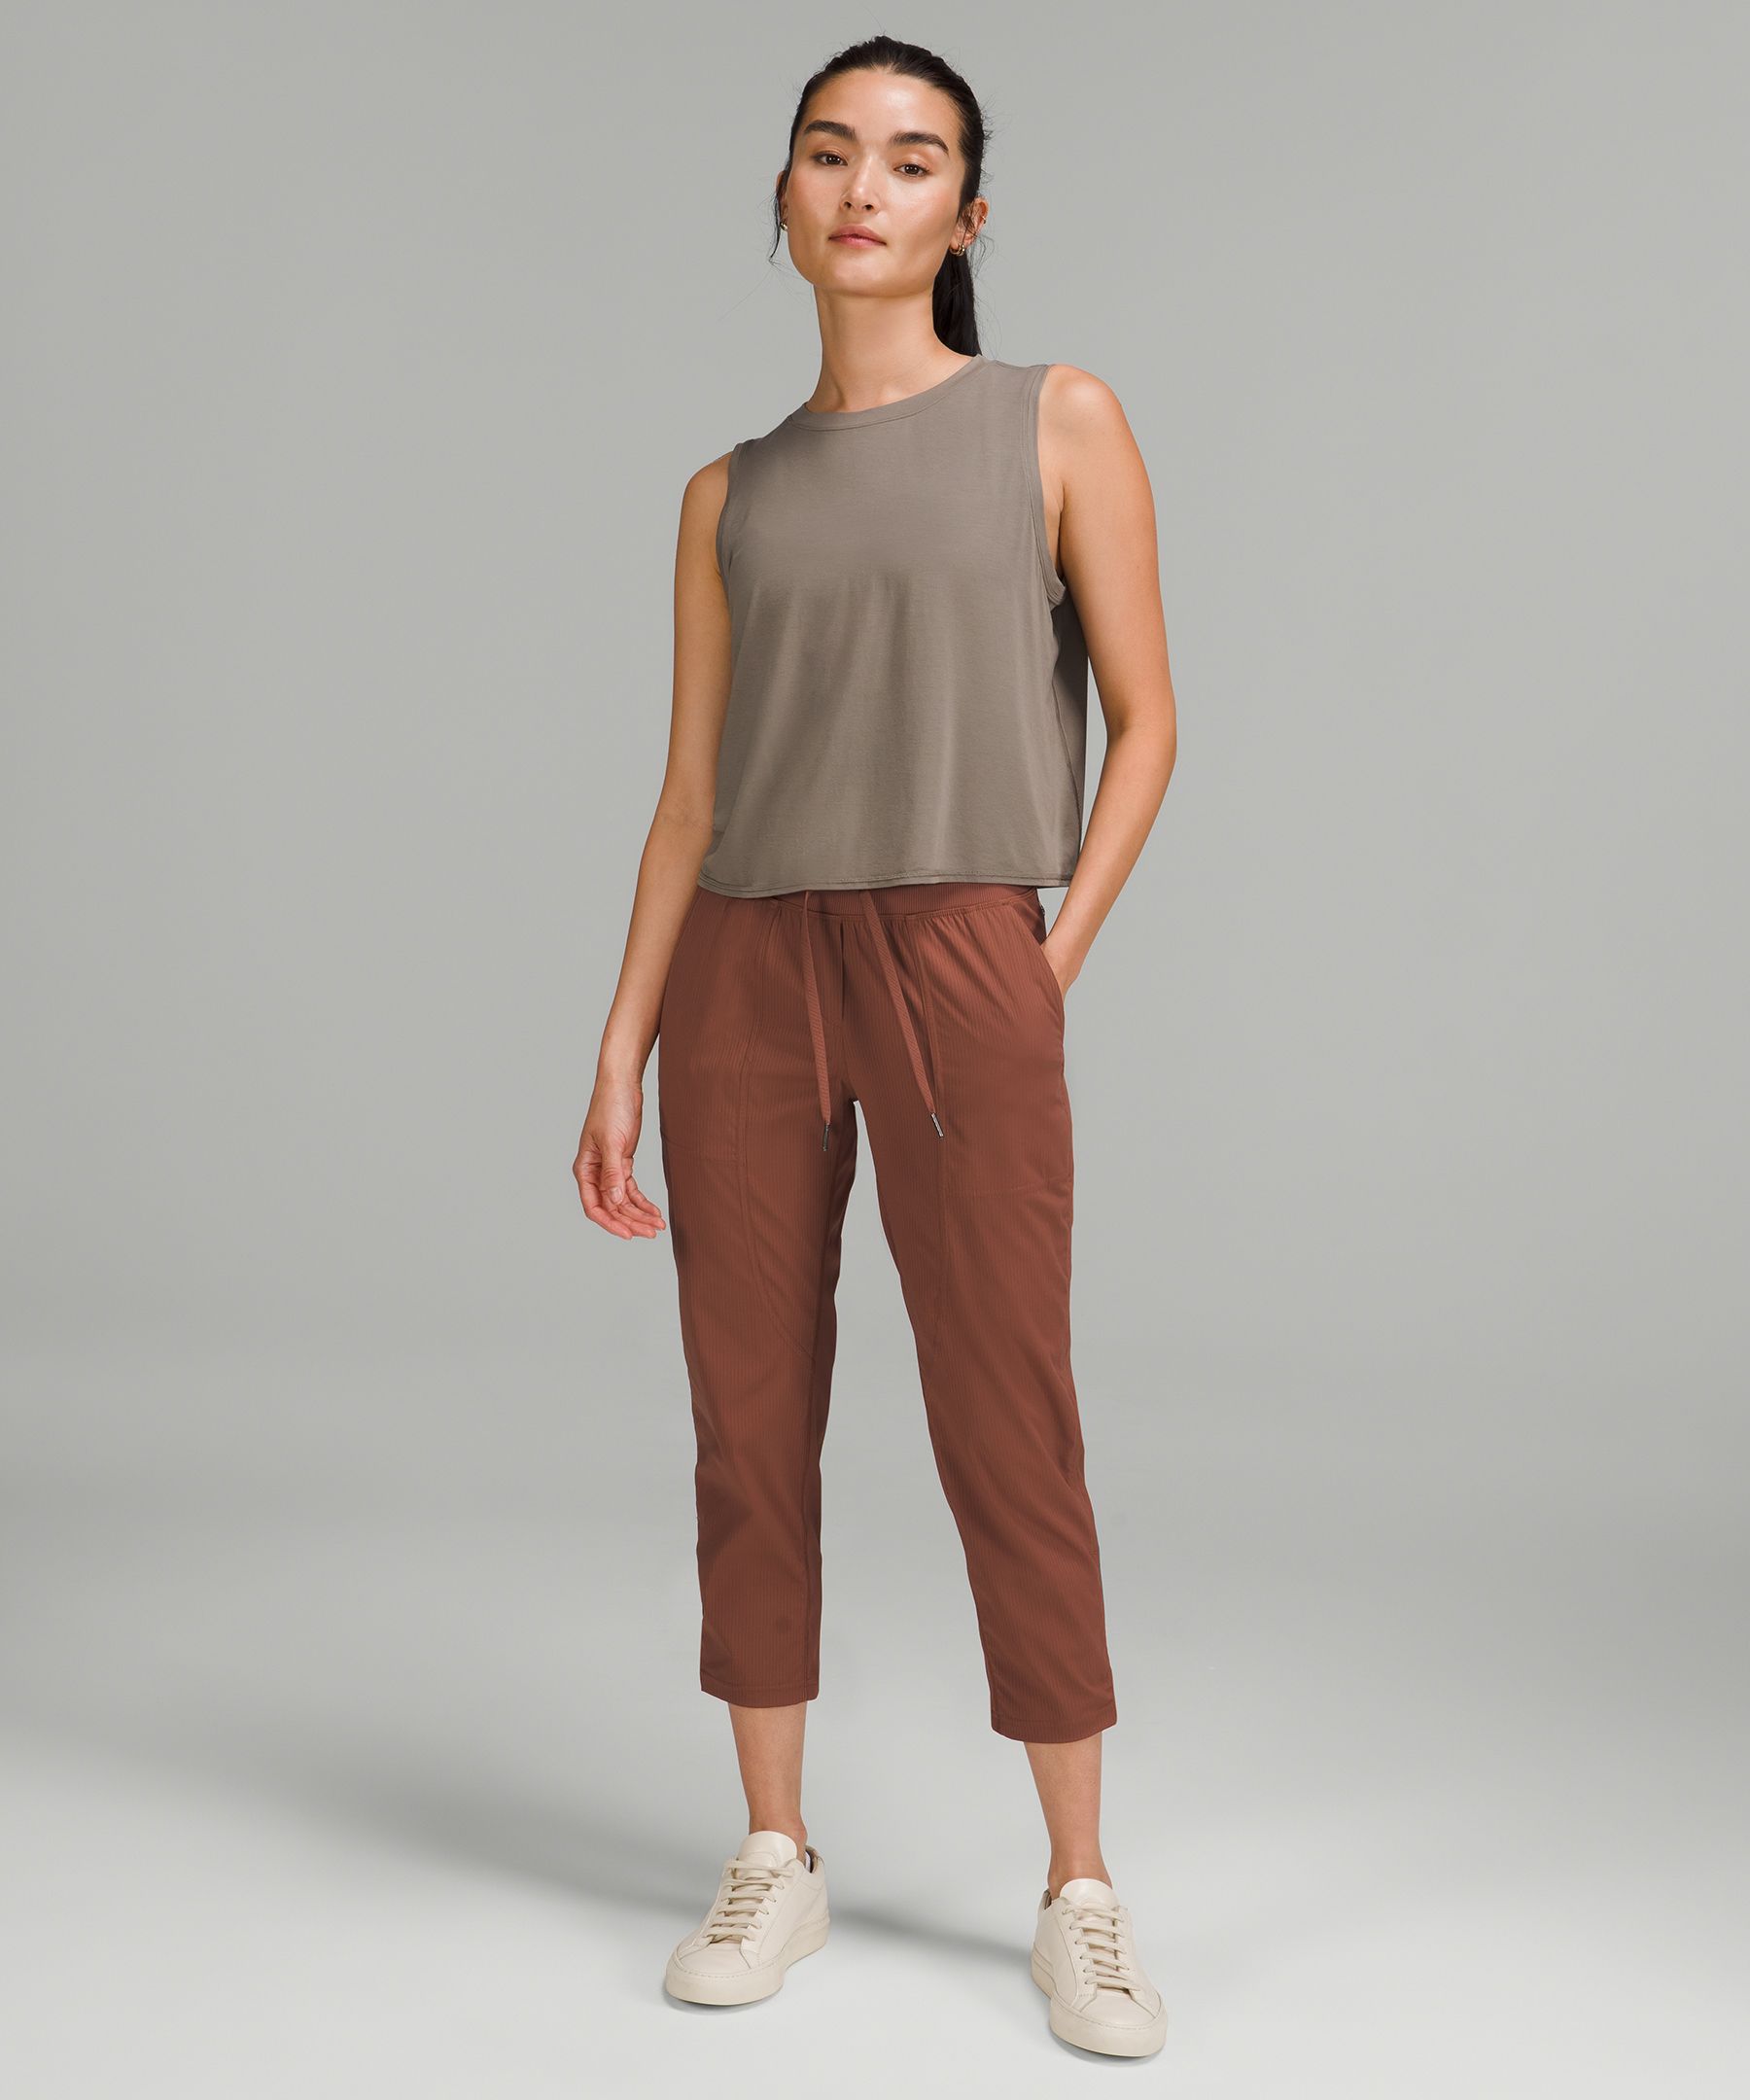 Fit Request Friday! Dance Studio Mid-Rise Cropped Pant